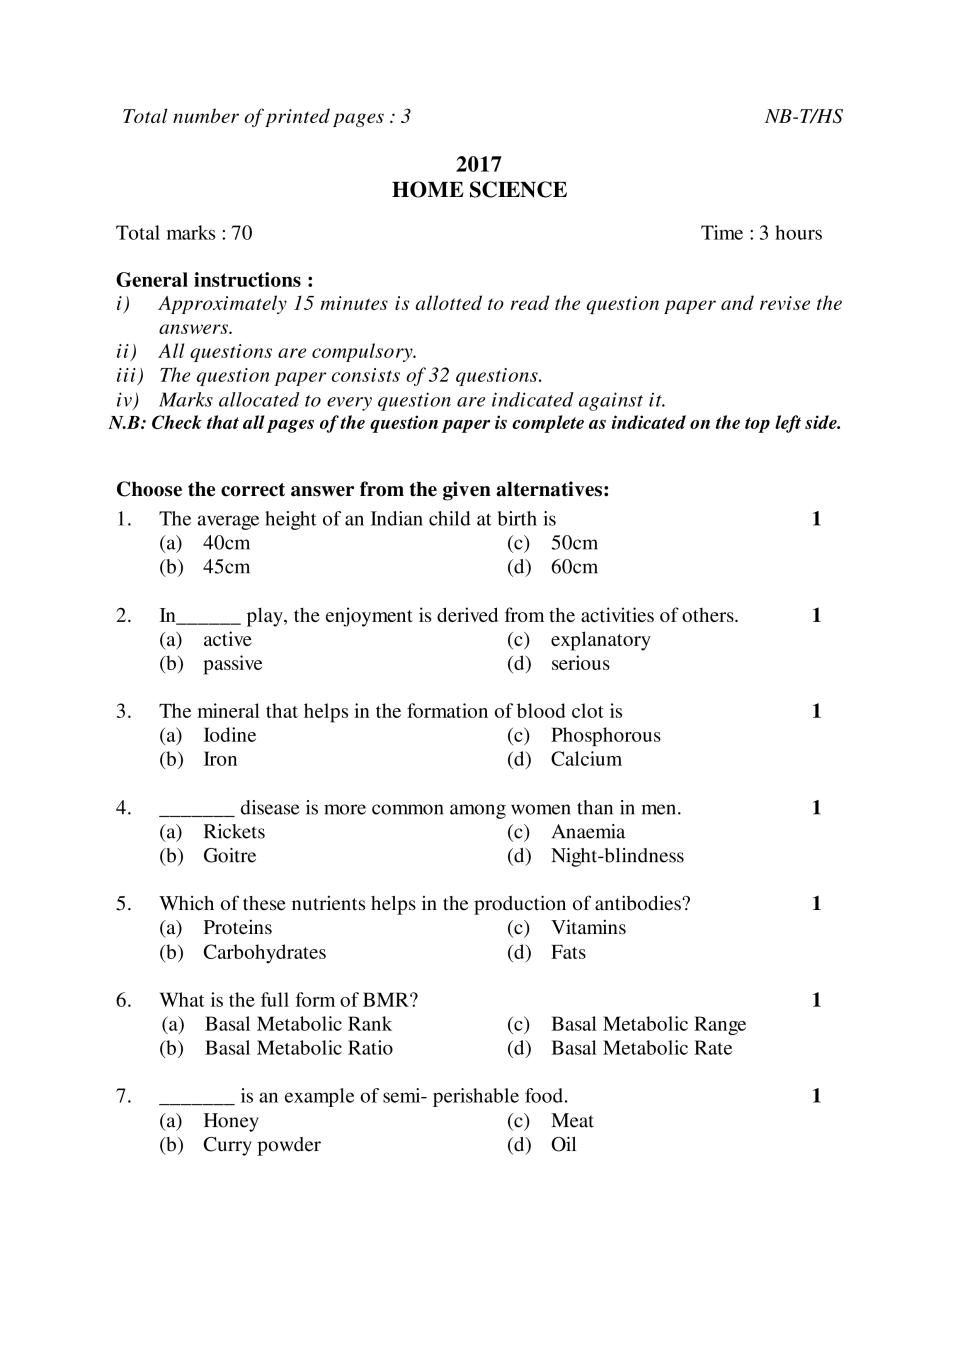 NBSE Class 10 Question Paper 2017 for Home Science - Page 1